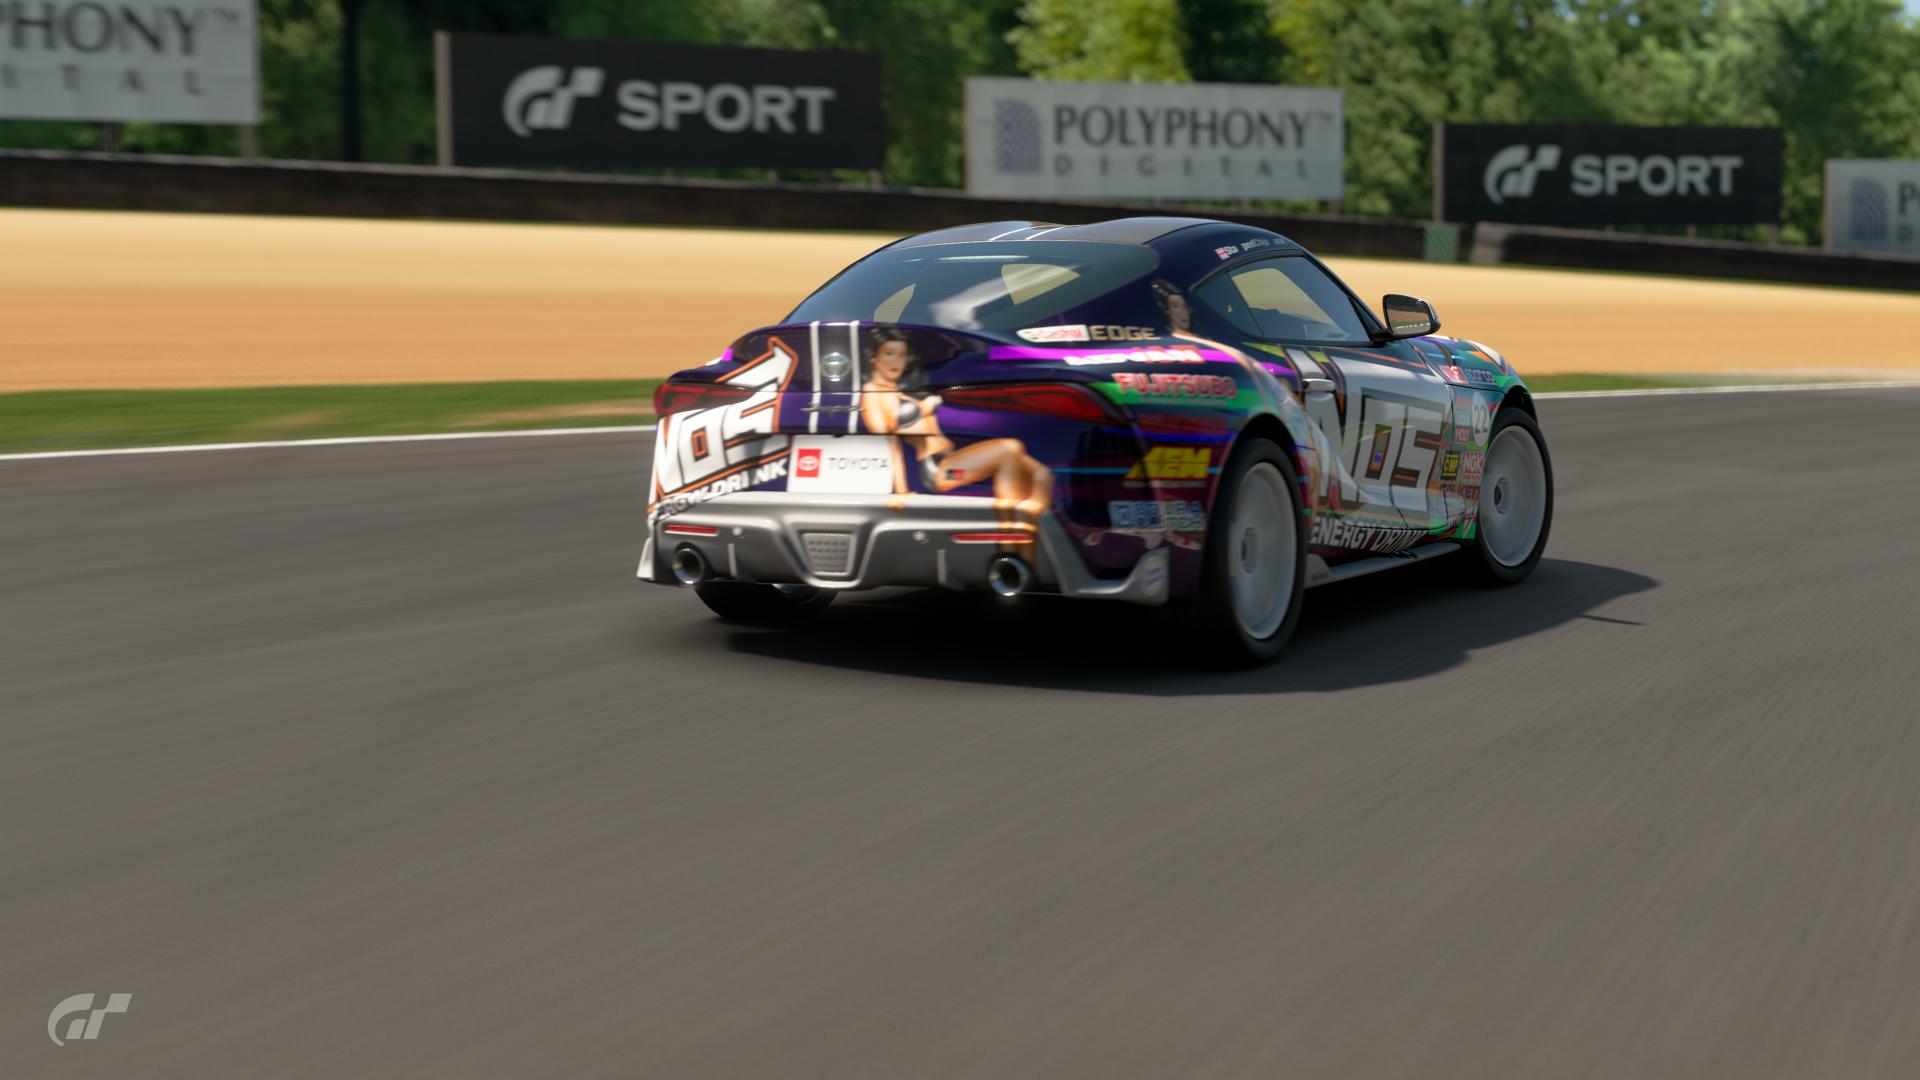 Loud Supra livery racing at Brands Hatch